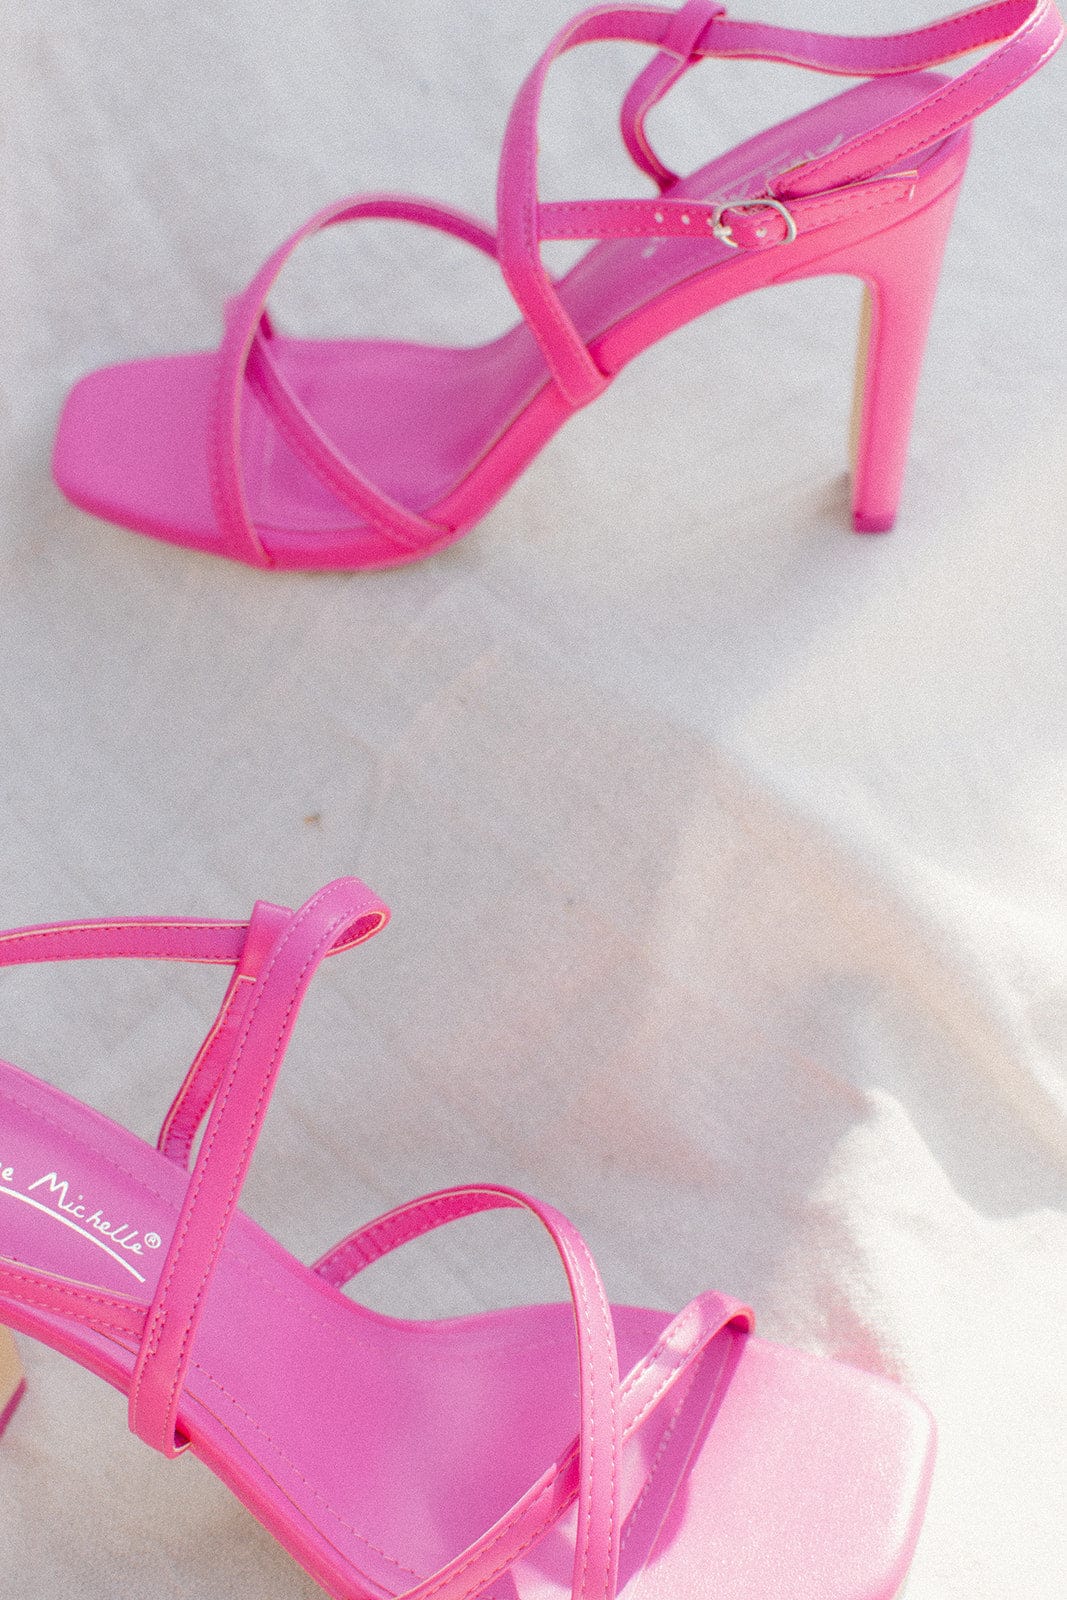 Hot Pink Strappy Heels